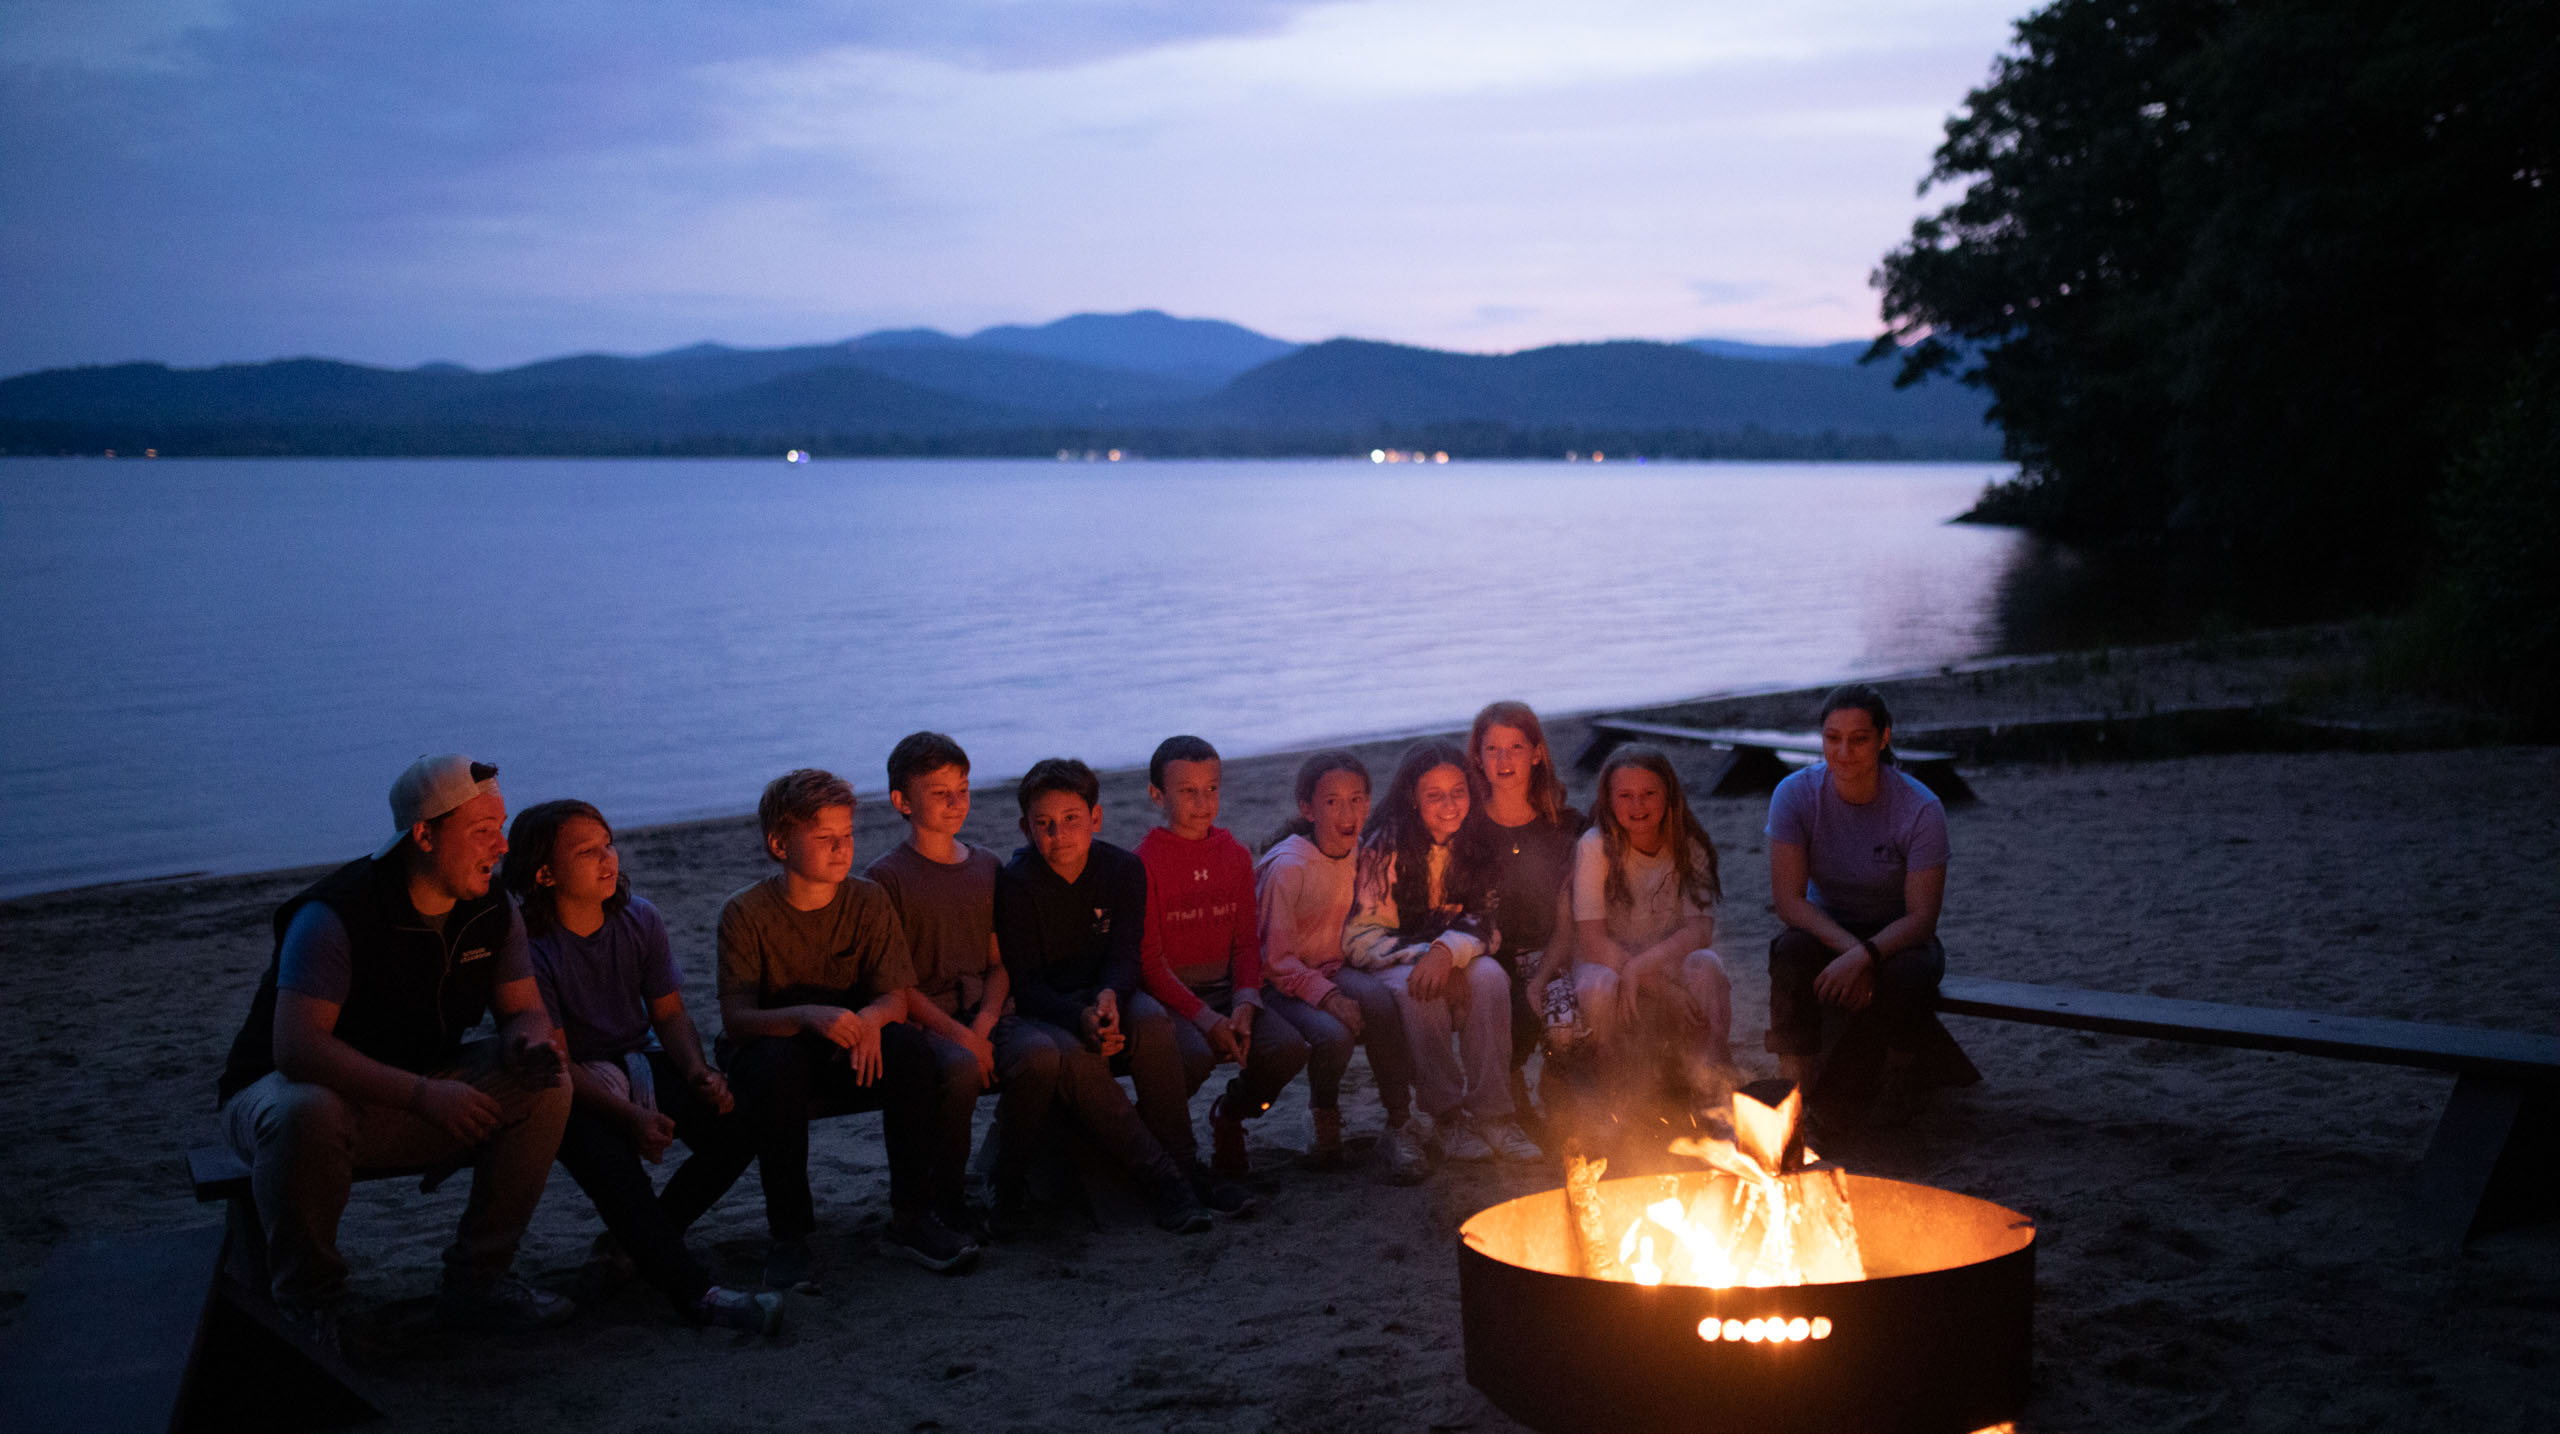 Kids sitting by campfire.